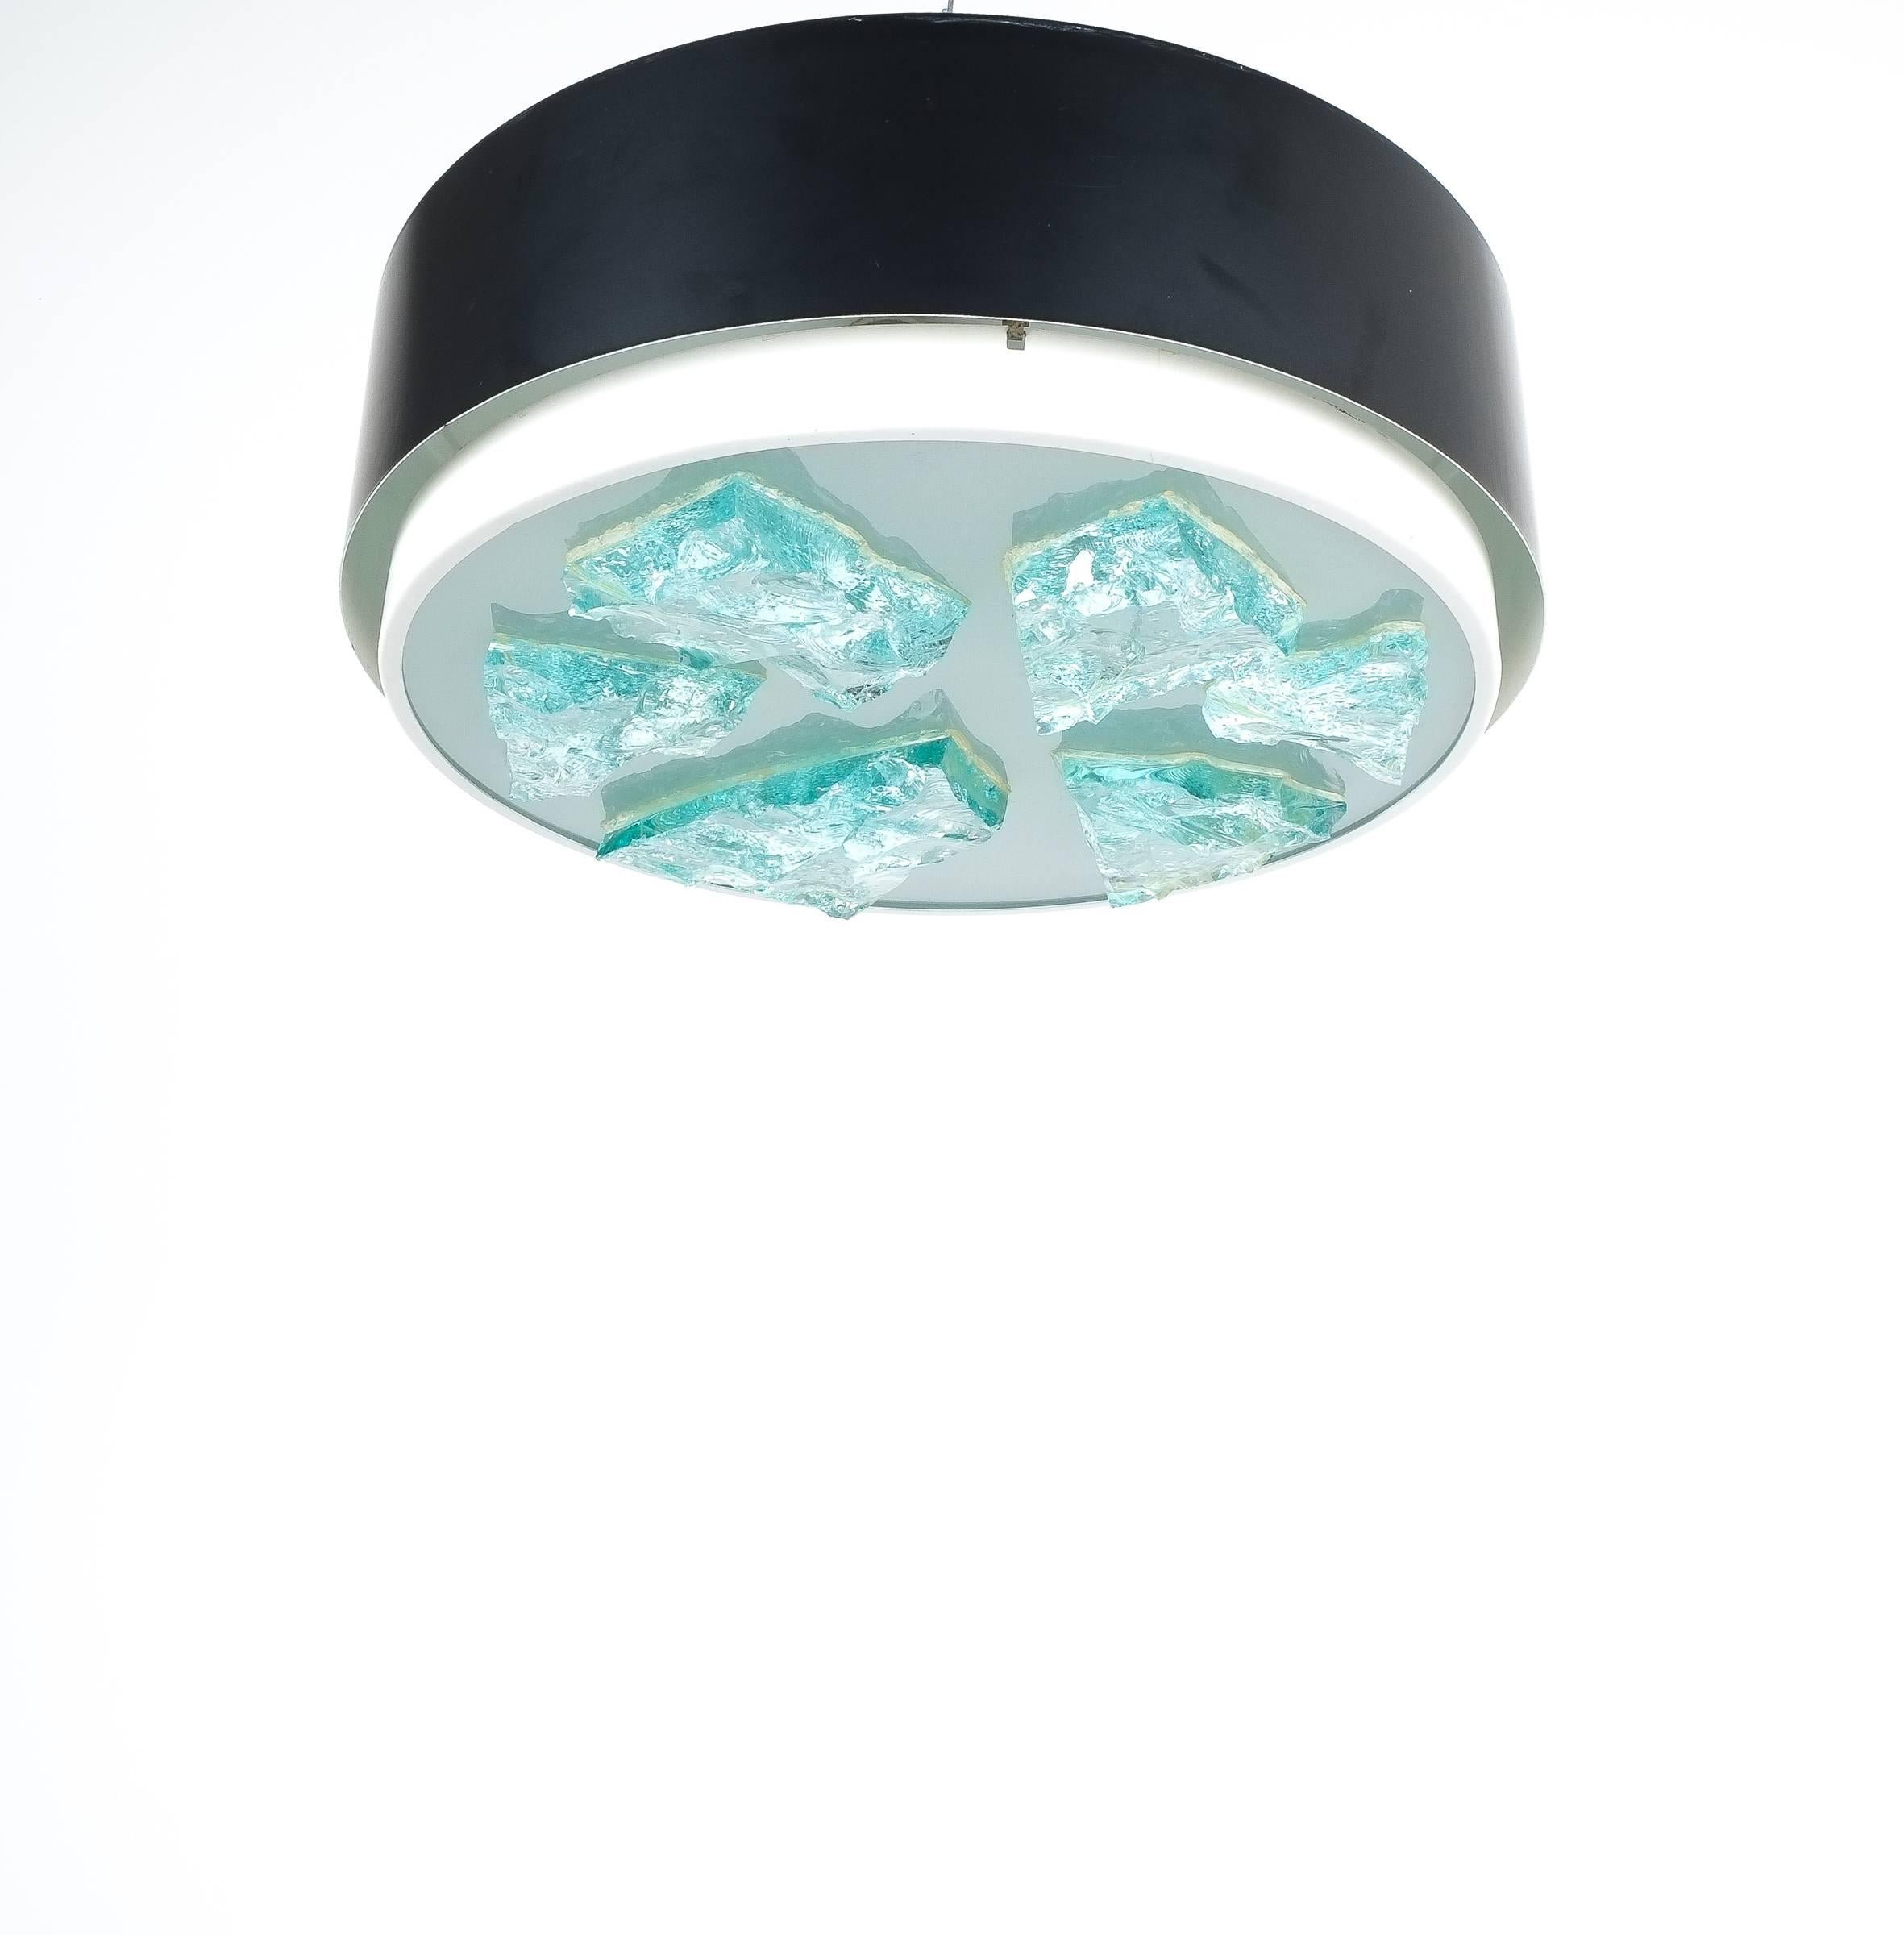 RAAK glass flush mount lamp style Fontana Arte, 1960. Excellent condition, no damages to the glass, refurbished, rewired with a diameter of 14.56